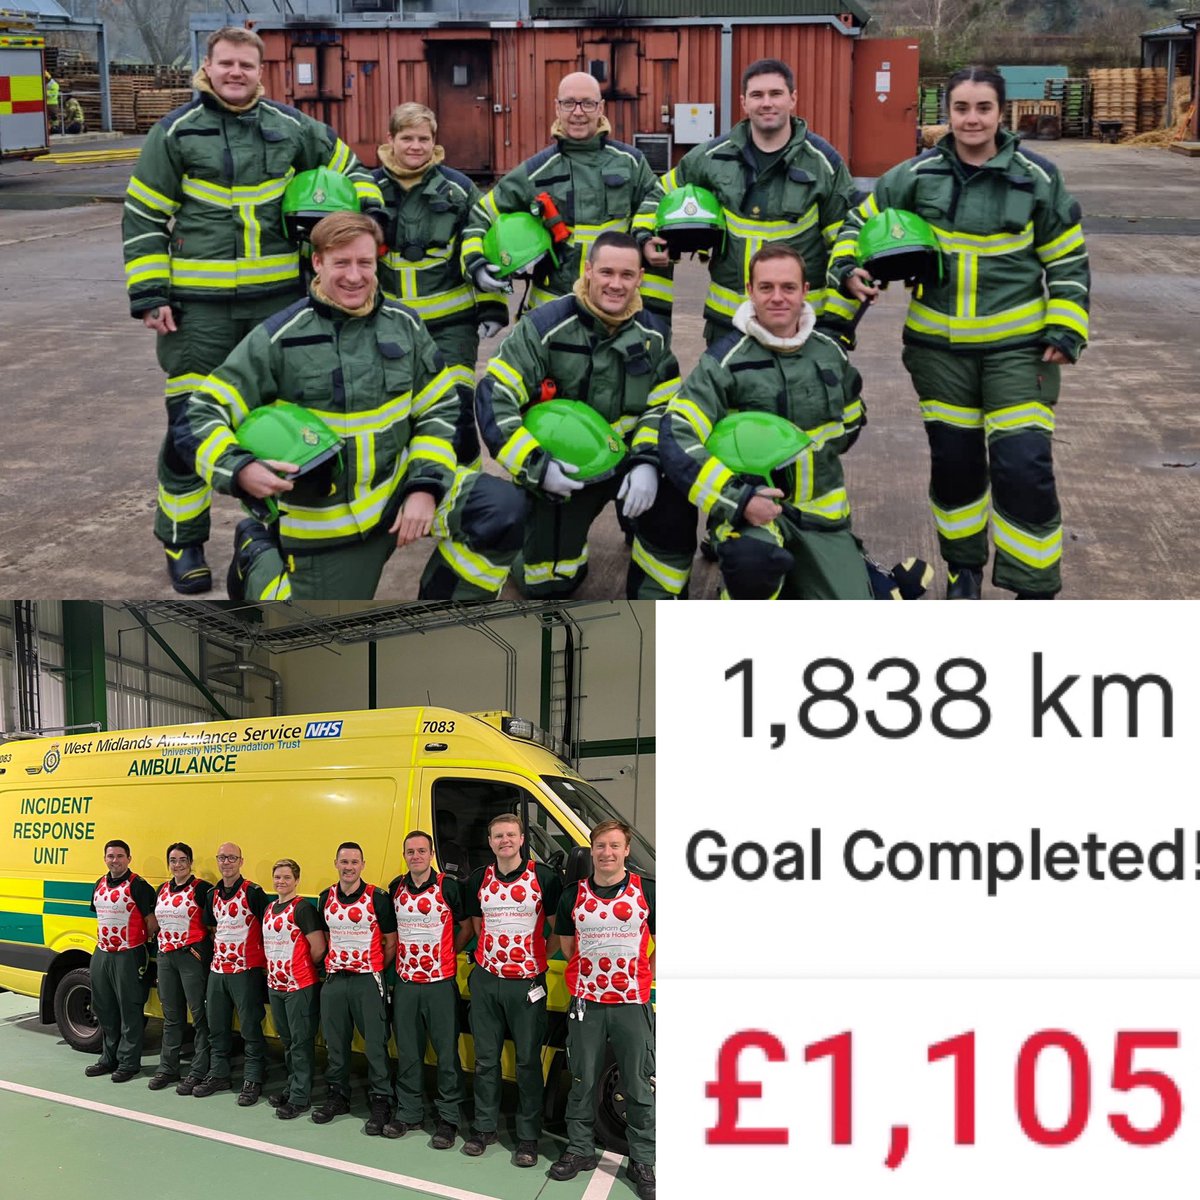 D Team have been raising money for @Bham_Childrens this November by running 1838km, a km for every child diagnosed with cancer per year. Today they completed the last couple of kilometres, just in time, and raised a total of £1105 for this great cause.